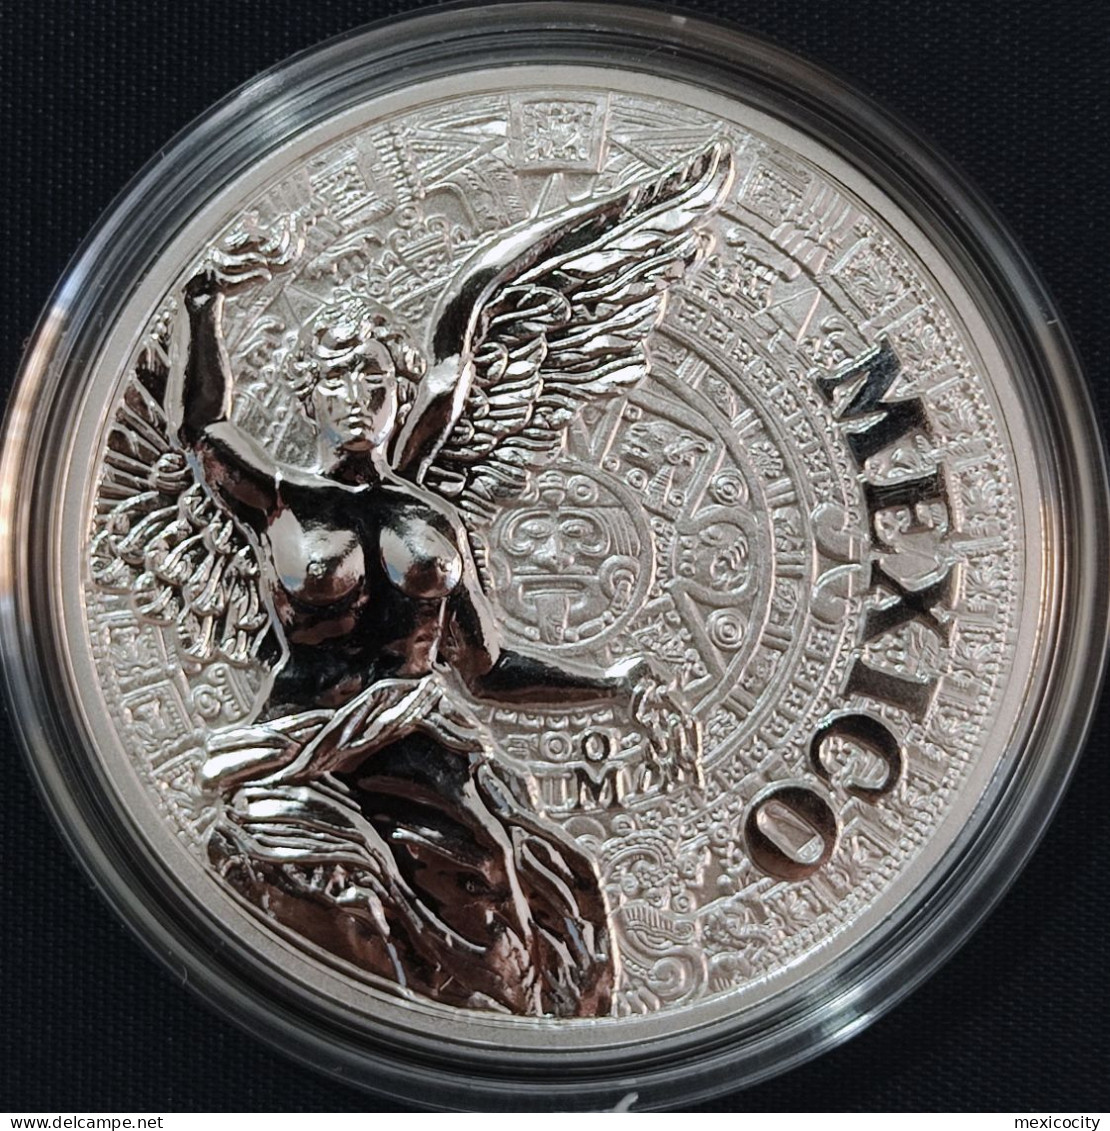 MEXICO Mint MEXICAN LANDSCAPE & WINGED VICTORY Deep Cameo Luxury .999 Silver Oz. PROOF Encapsulated - Mexico